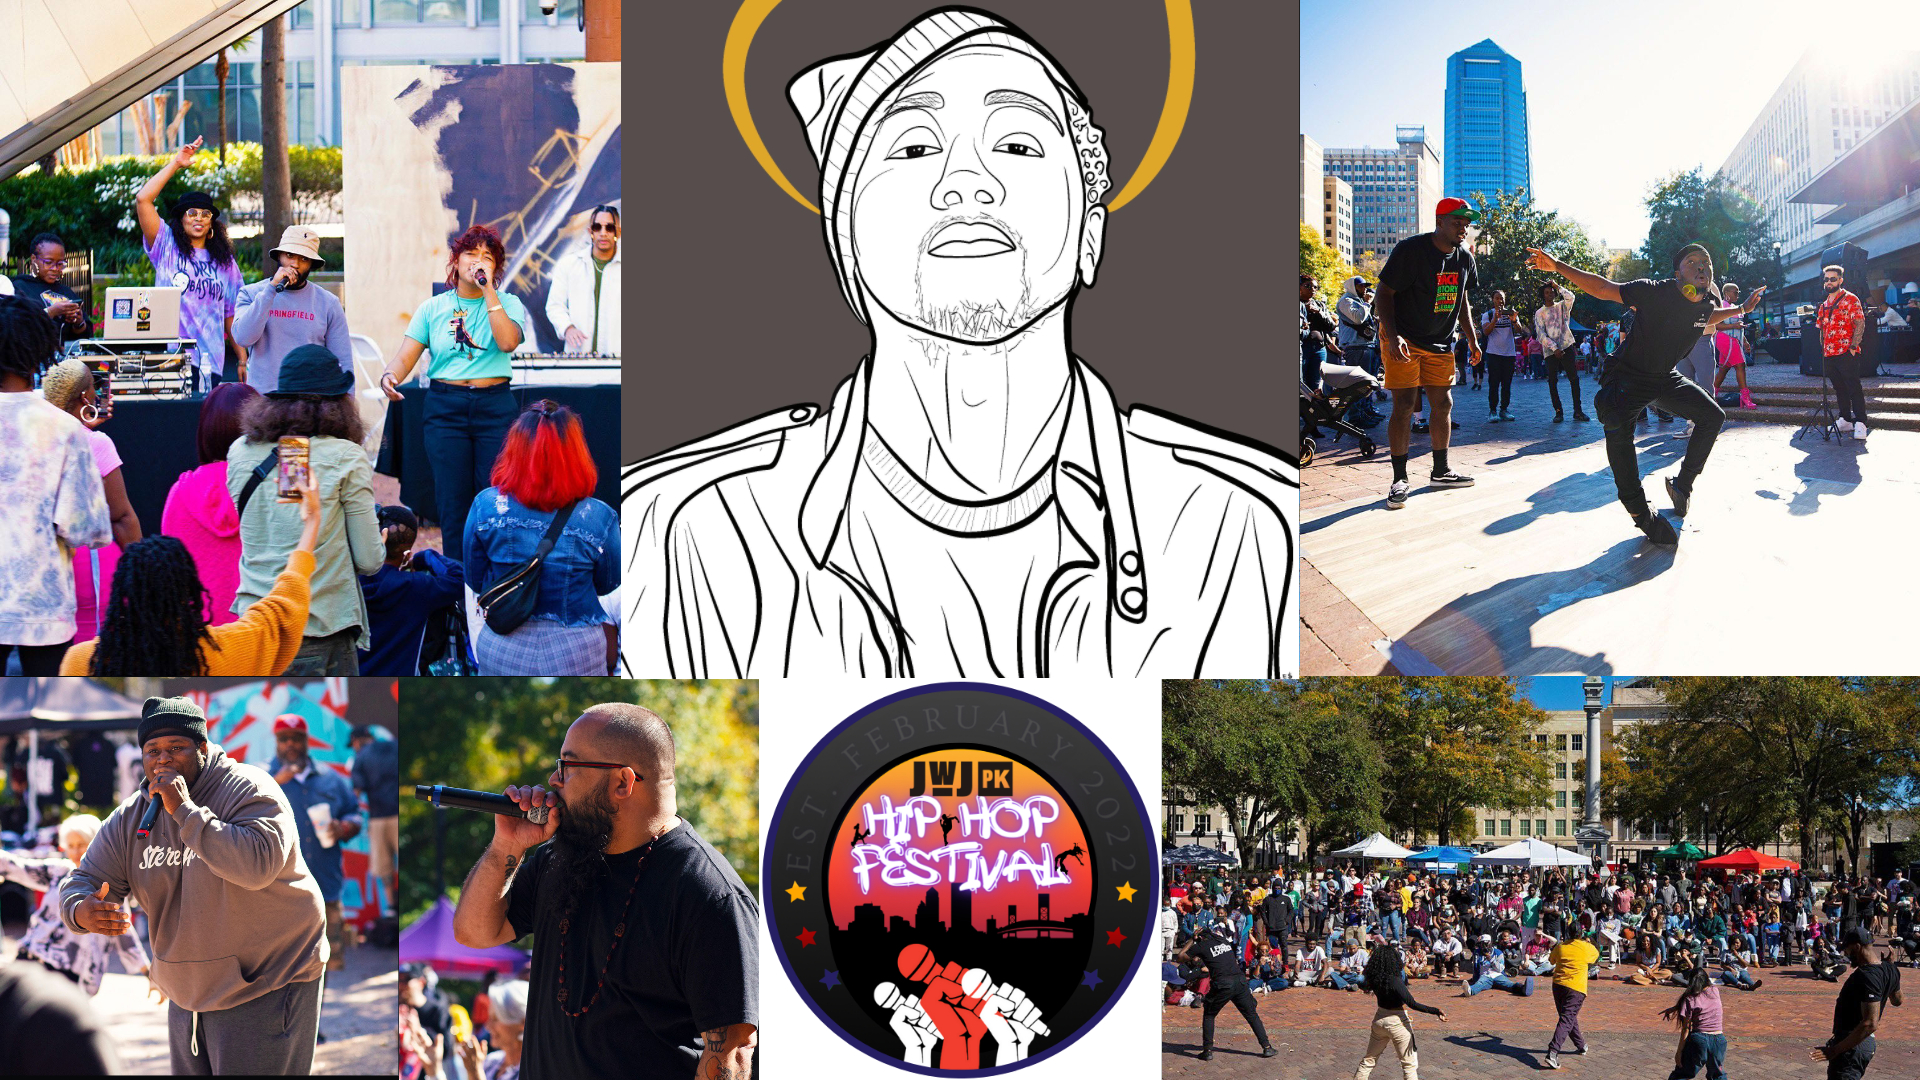 Collage of photos from JWJ Hip-Hop festival